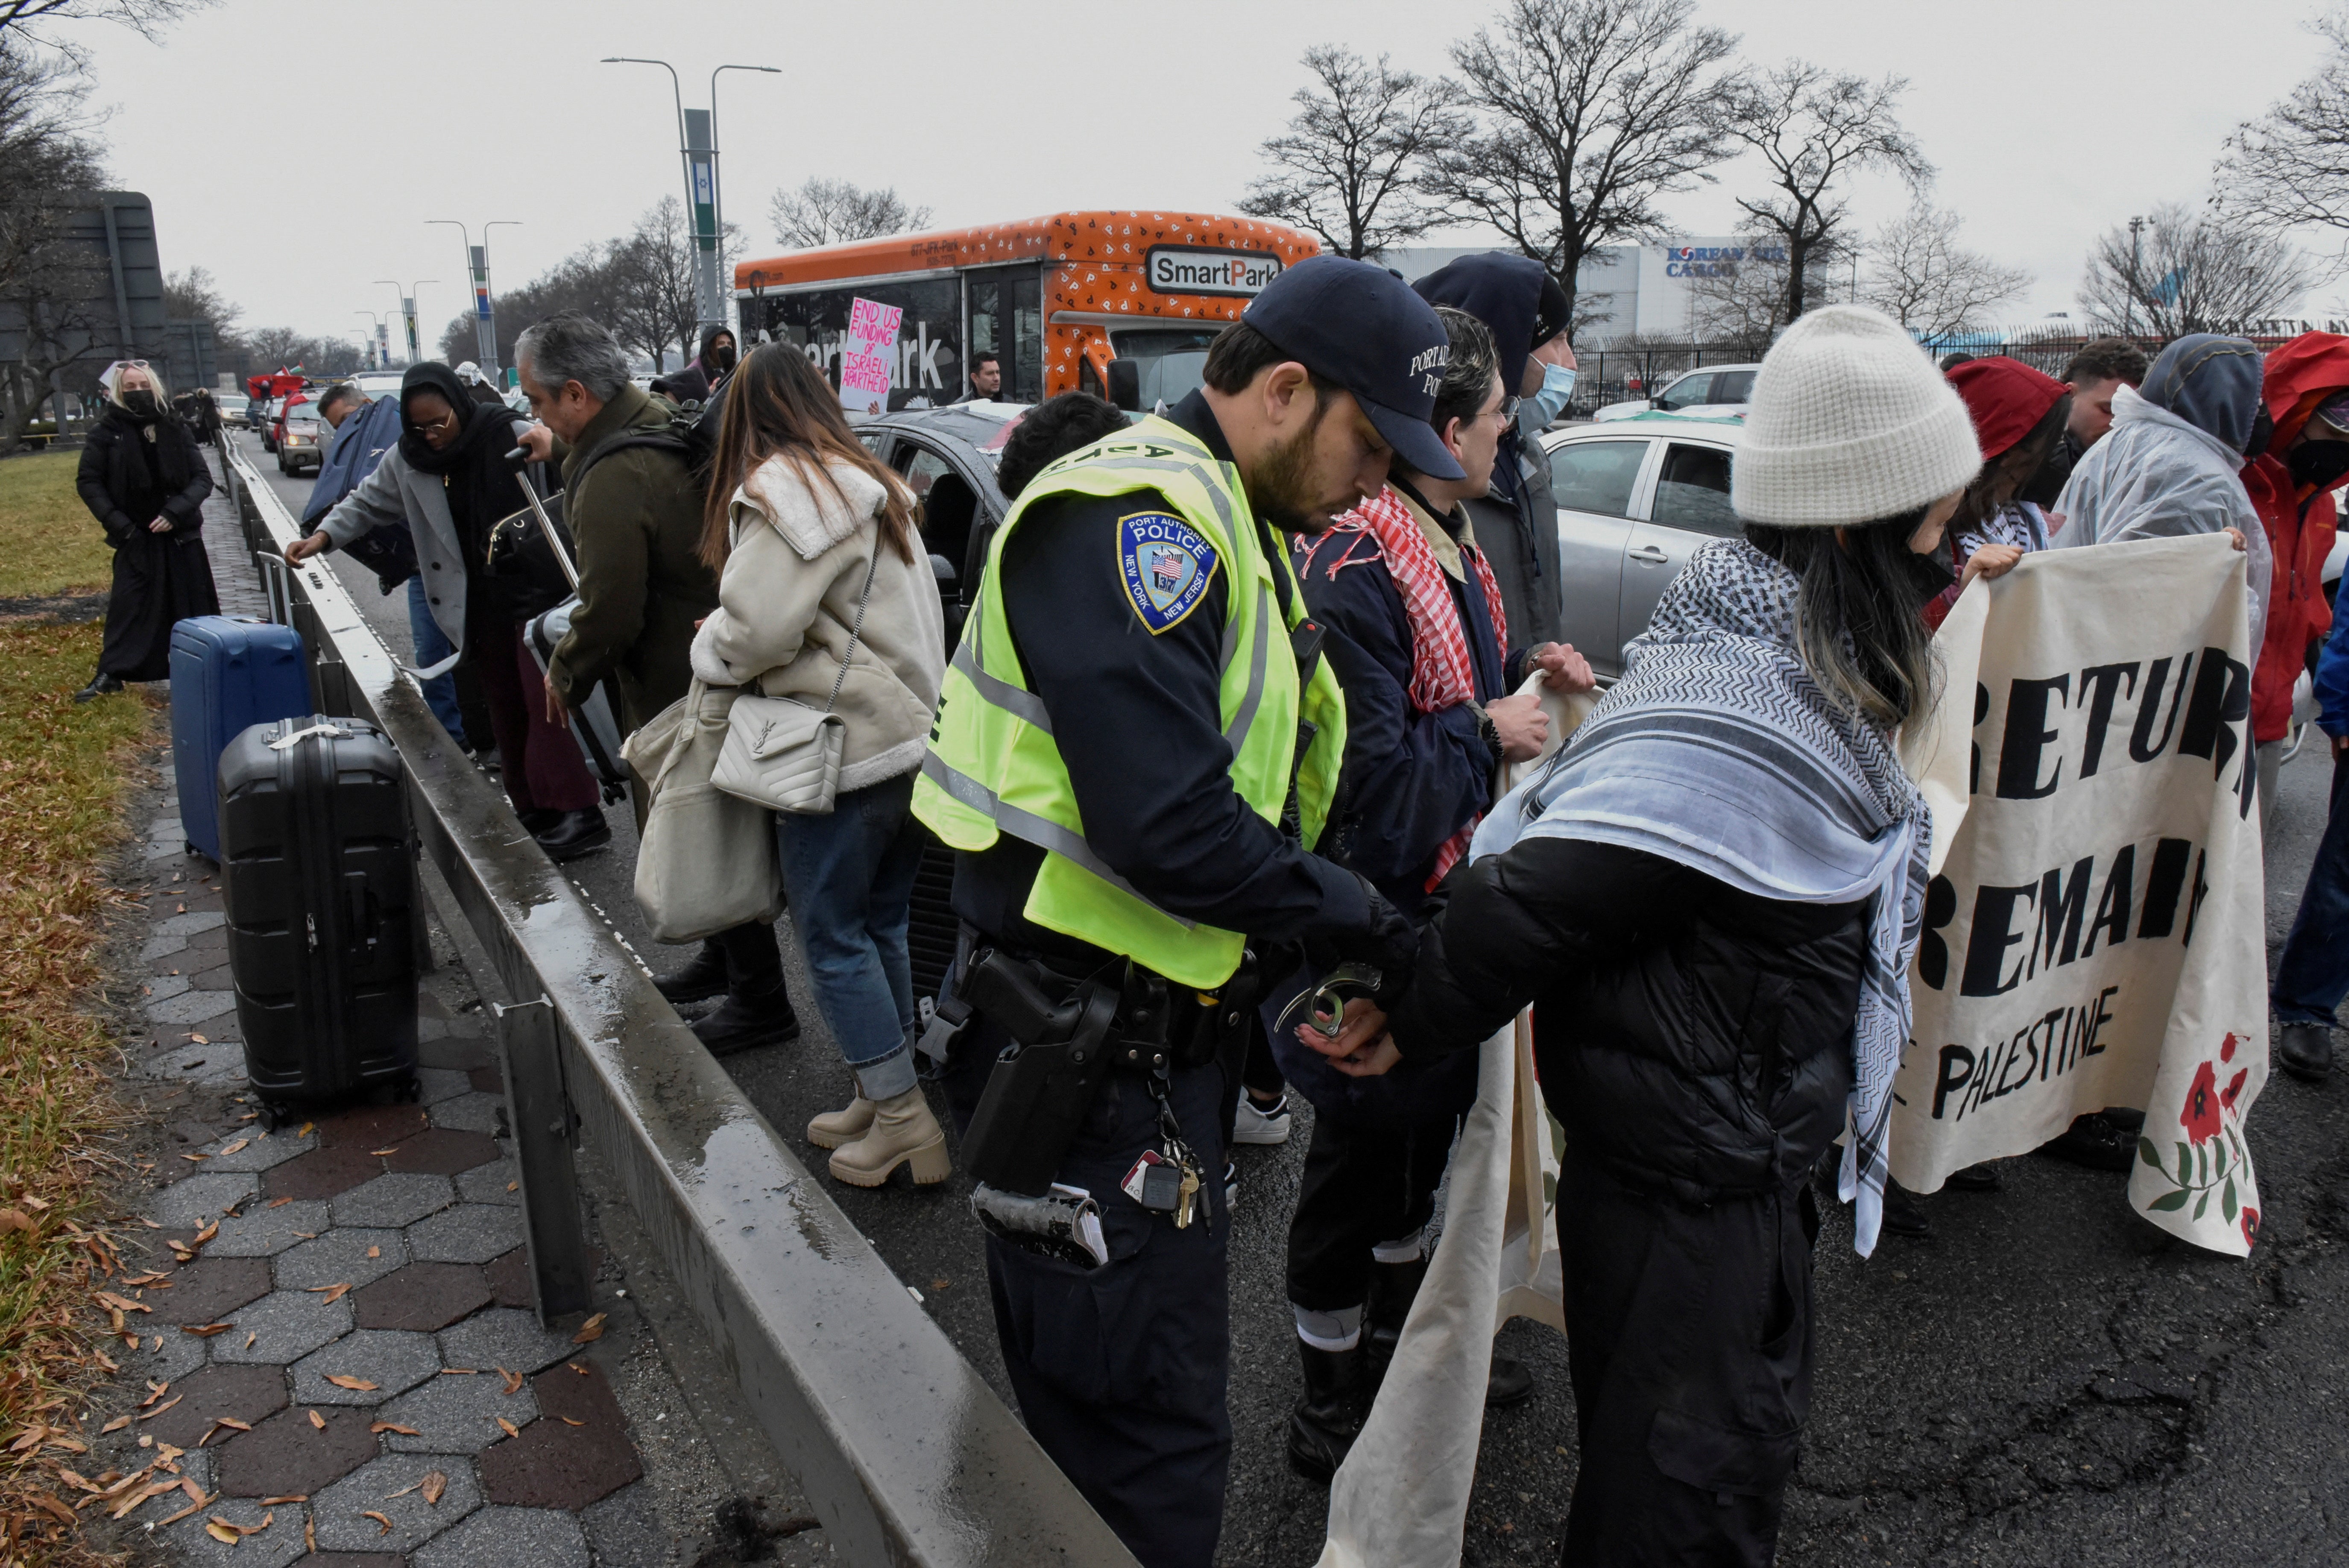 Pro-Palestinian demonstrators are detained by Port Authority police after blocking traffic on the road that leads to John F Kennedy airport on 27 December